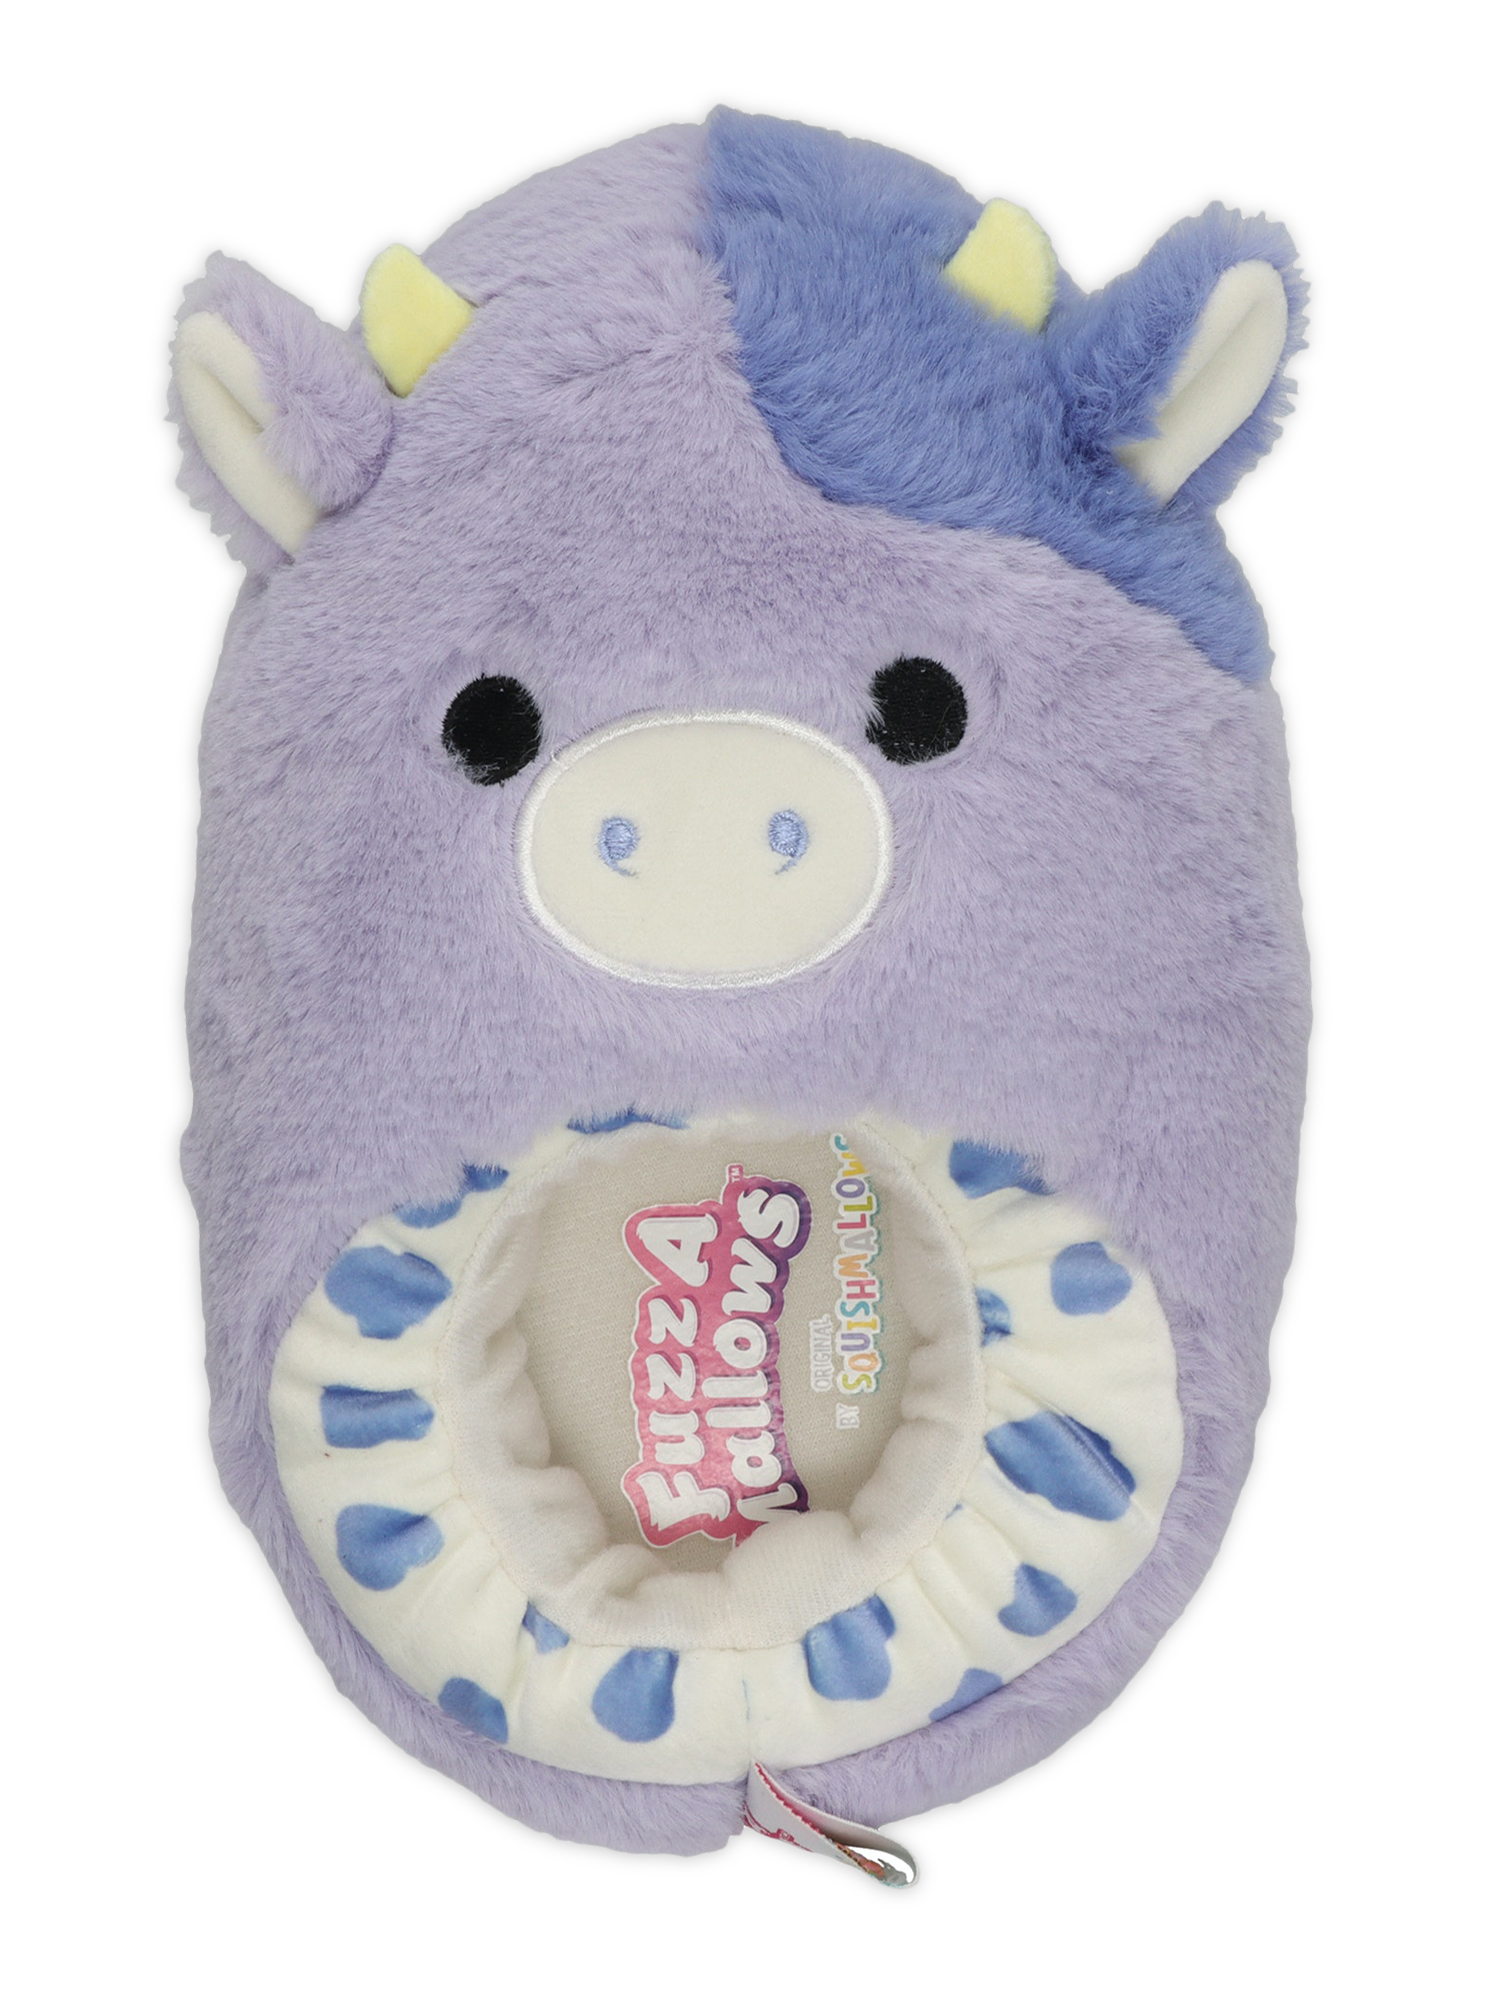 Squishmallows Toddler & Kids Bubba the Cow Slippers - image 1 of 6